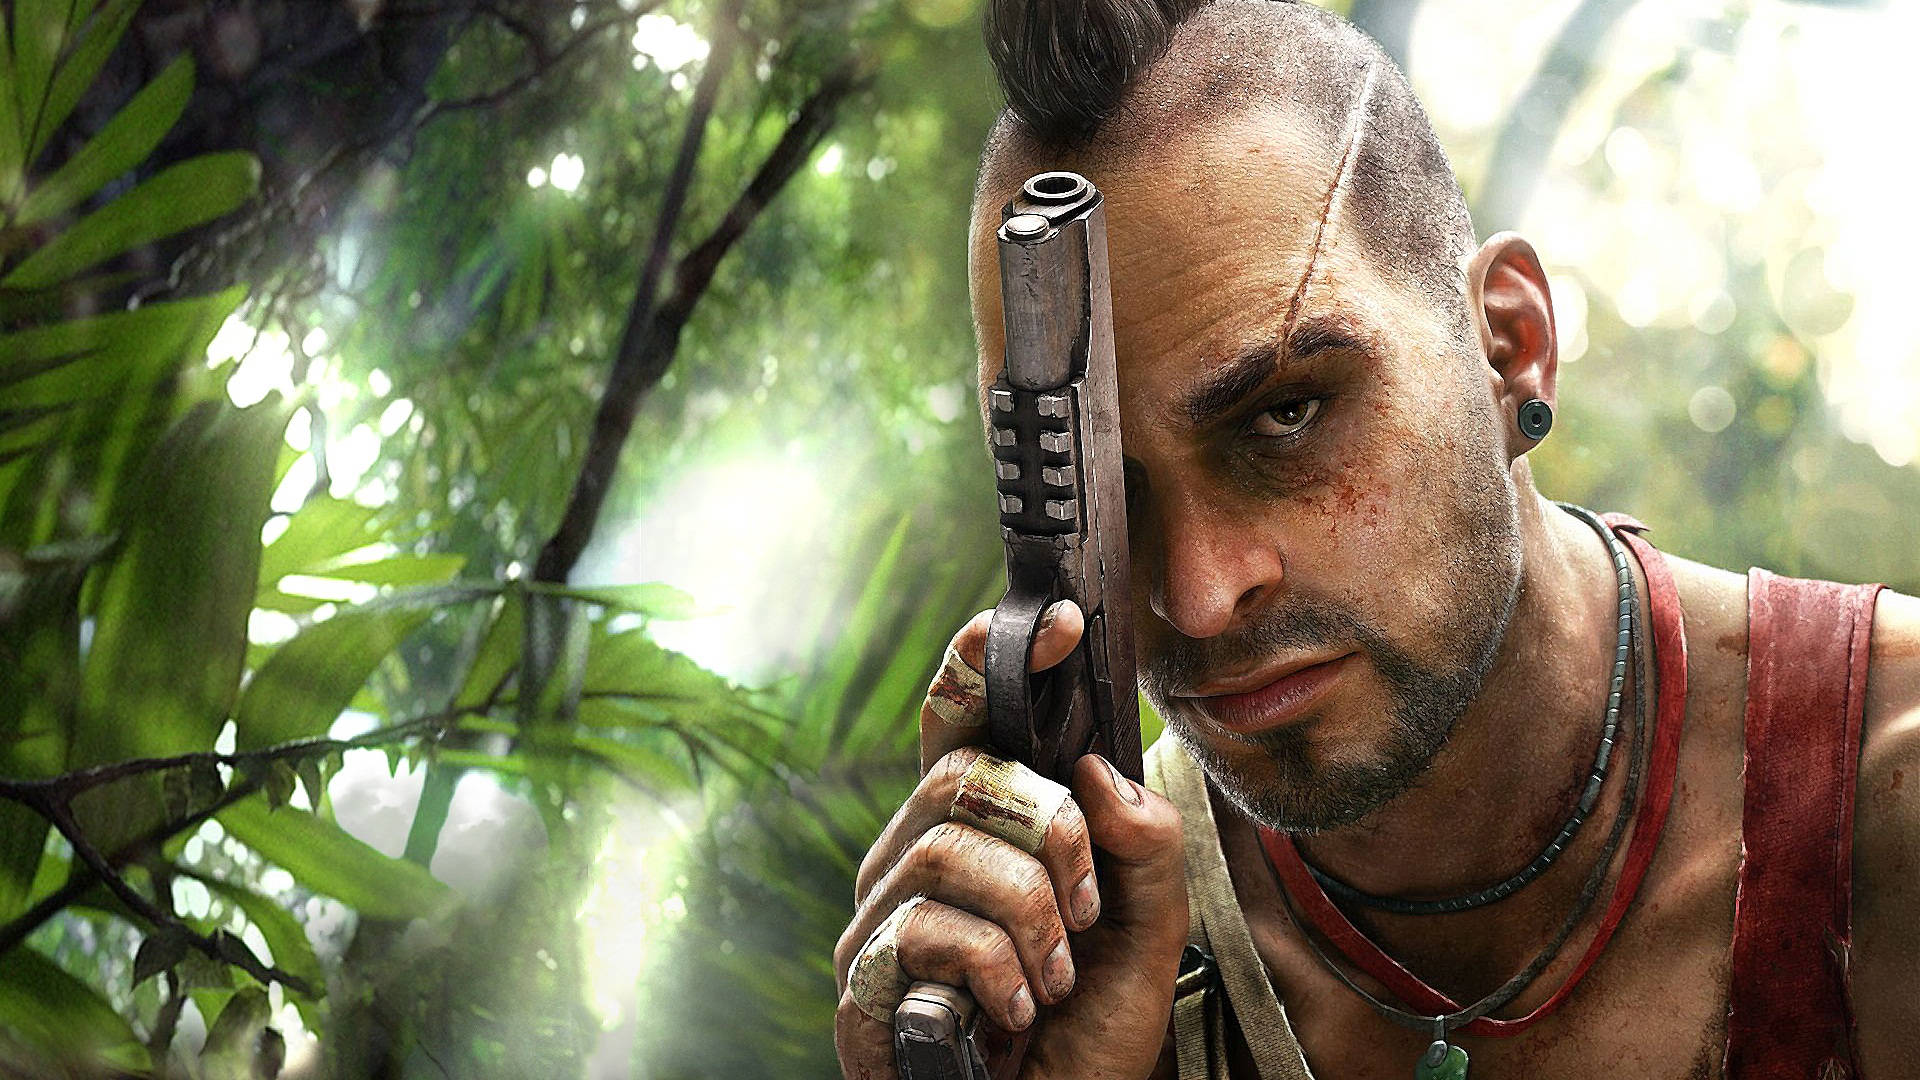 Far Cry 3 Vaas Montenegro In Jungle Background